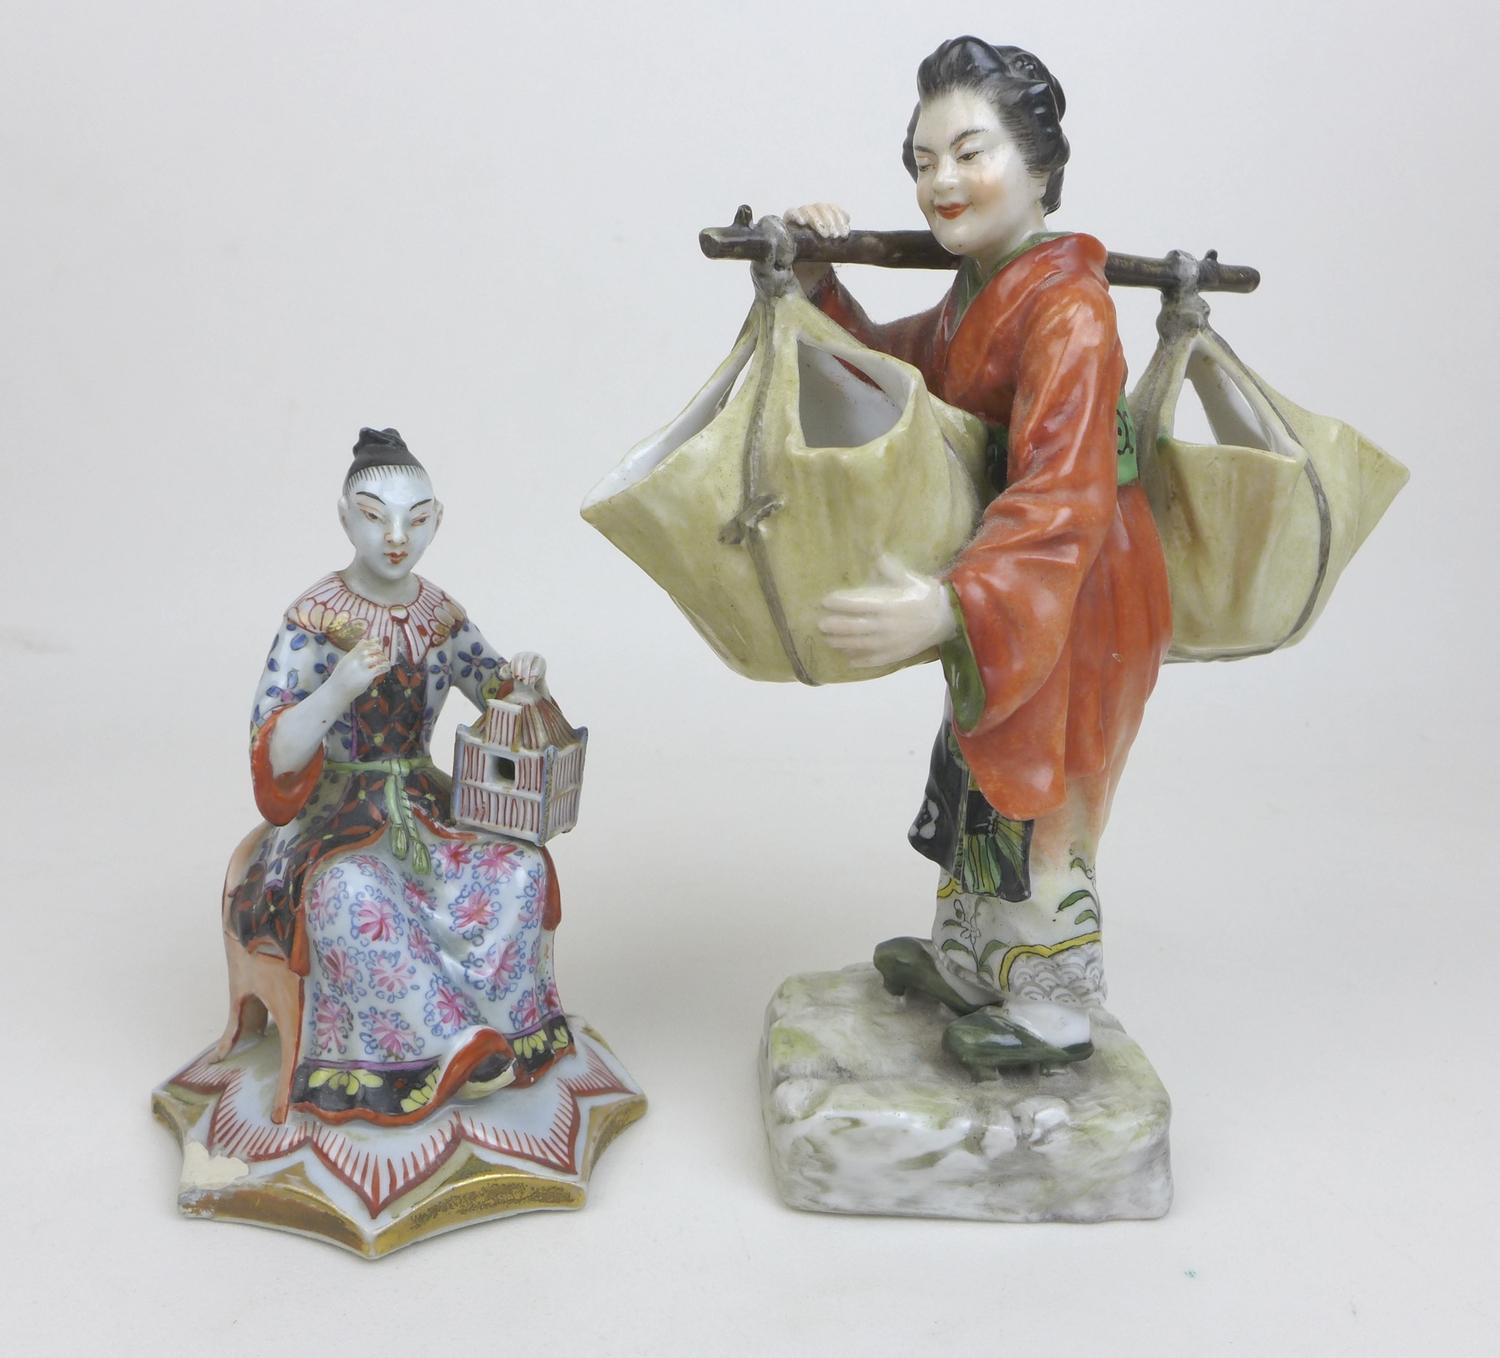 A group of four Oriental figurines, a Hochst style Chinese lady carrying her wares, with cartwheel - Image 5 of 6